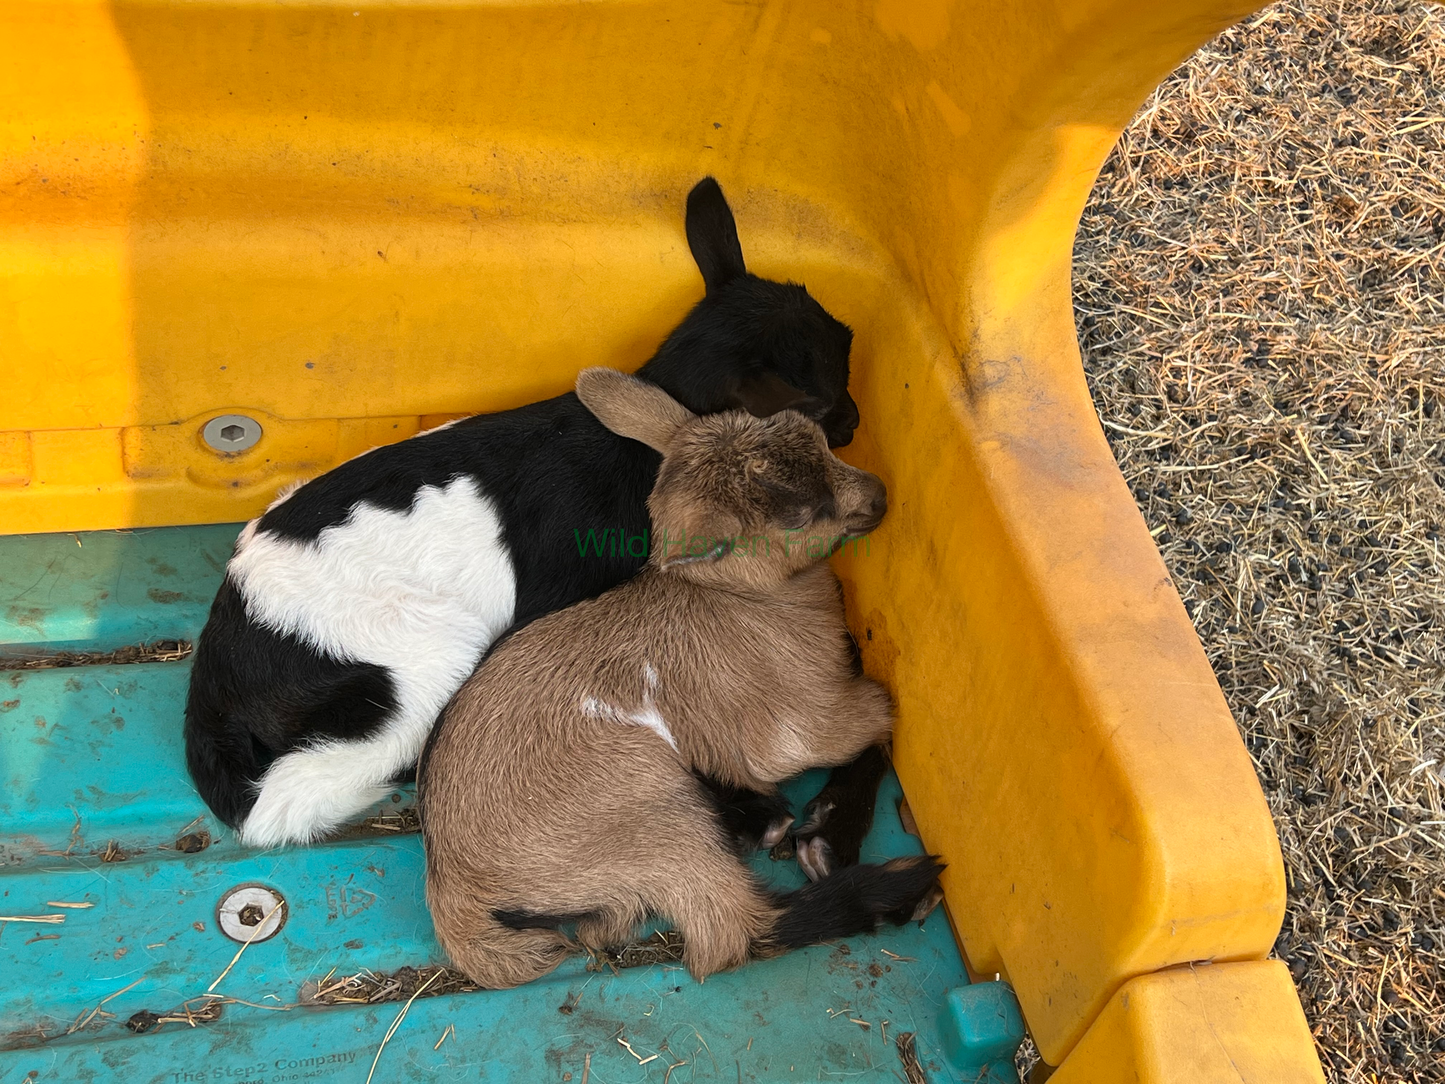 Two baby goats in a child's outdoor plastic toy